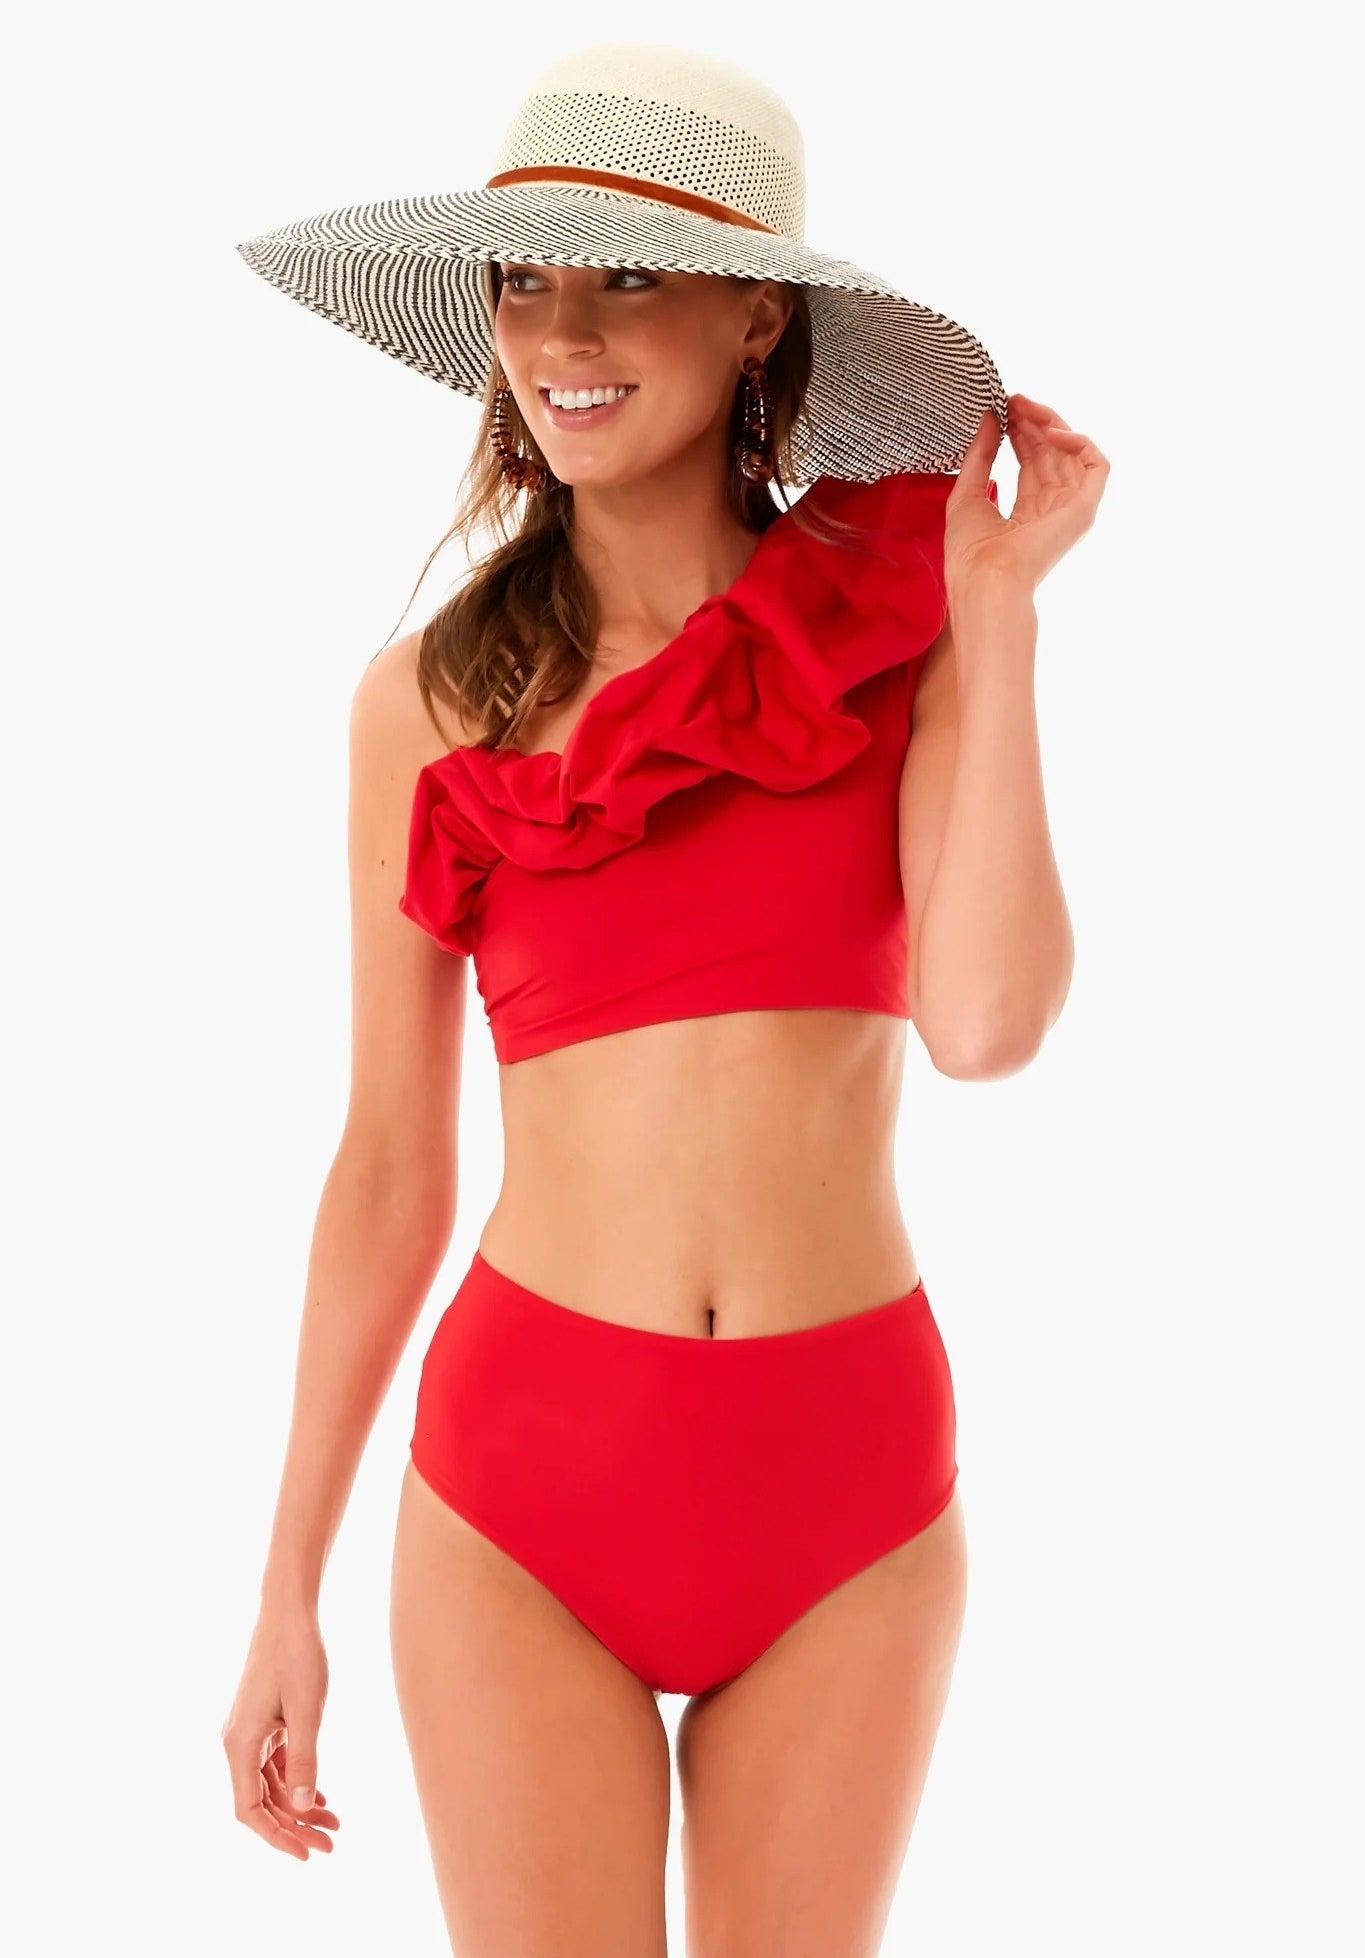 Image of model wearing red swimsuit